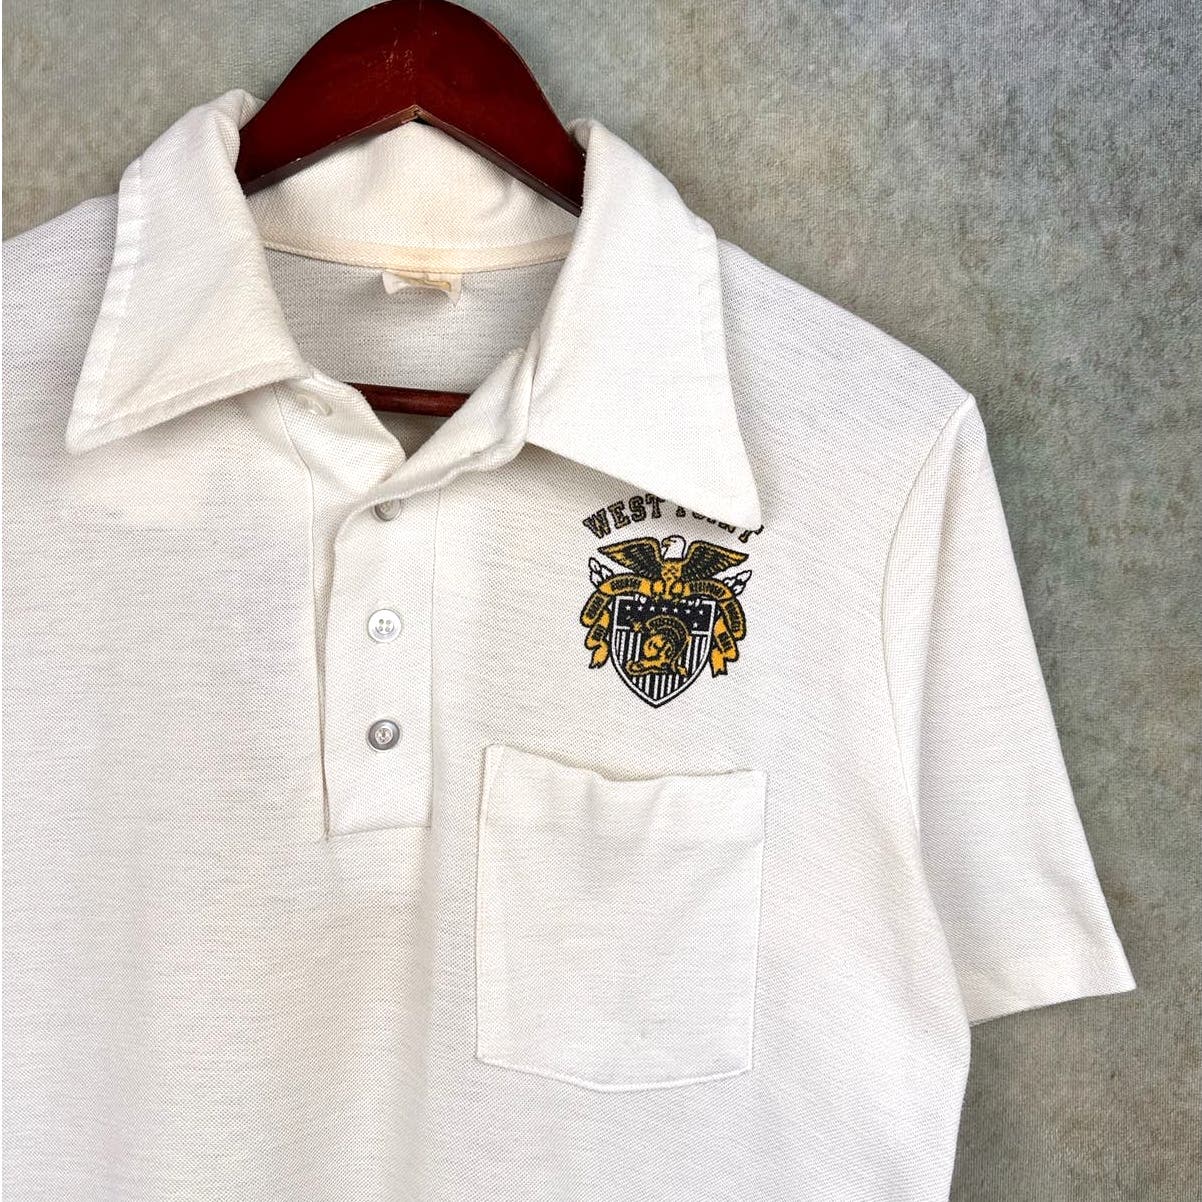 Vintage 80s Army West Point Academy Polo Shirt L